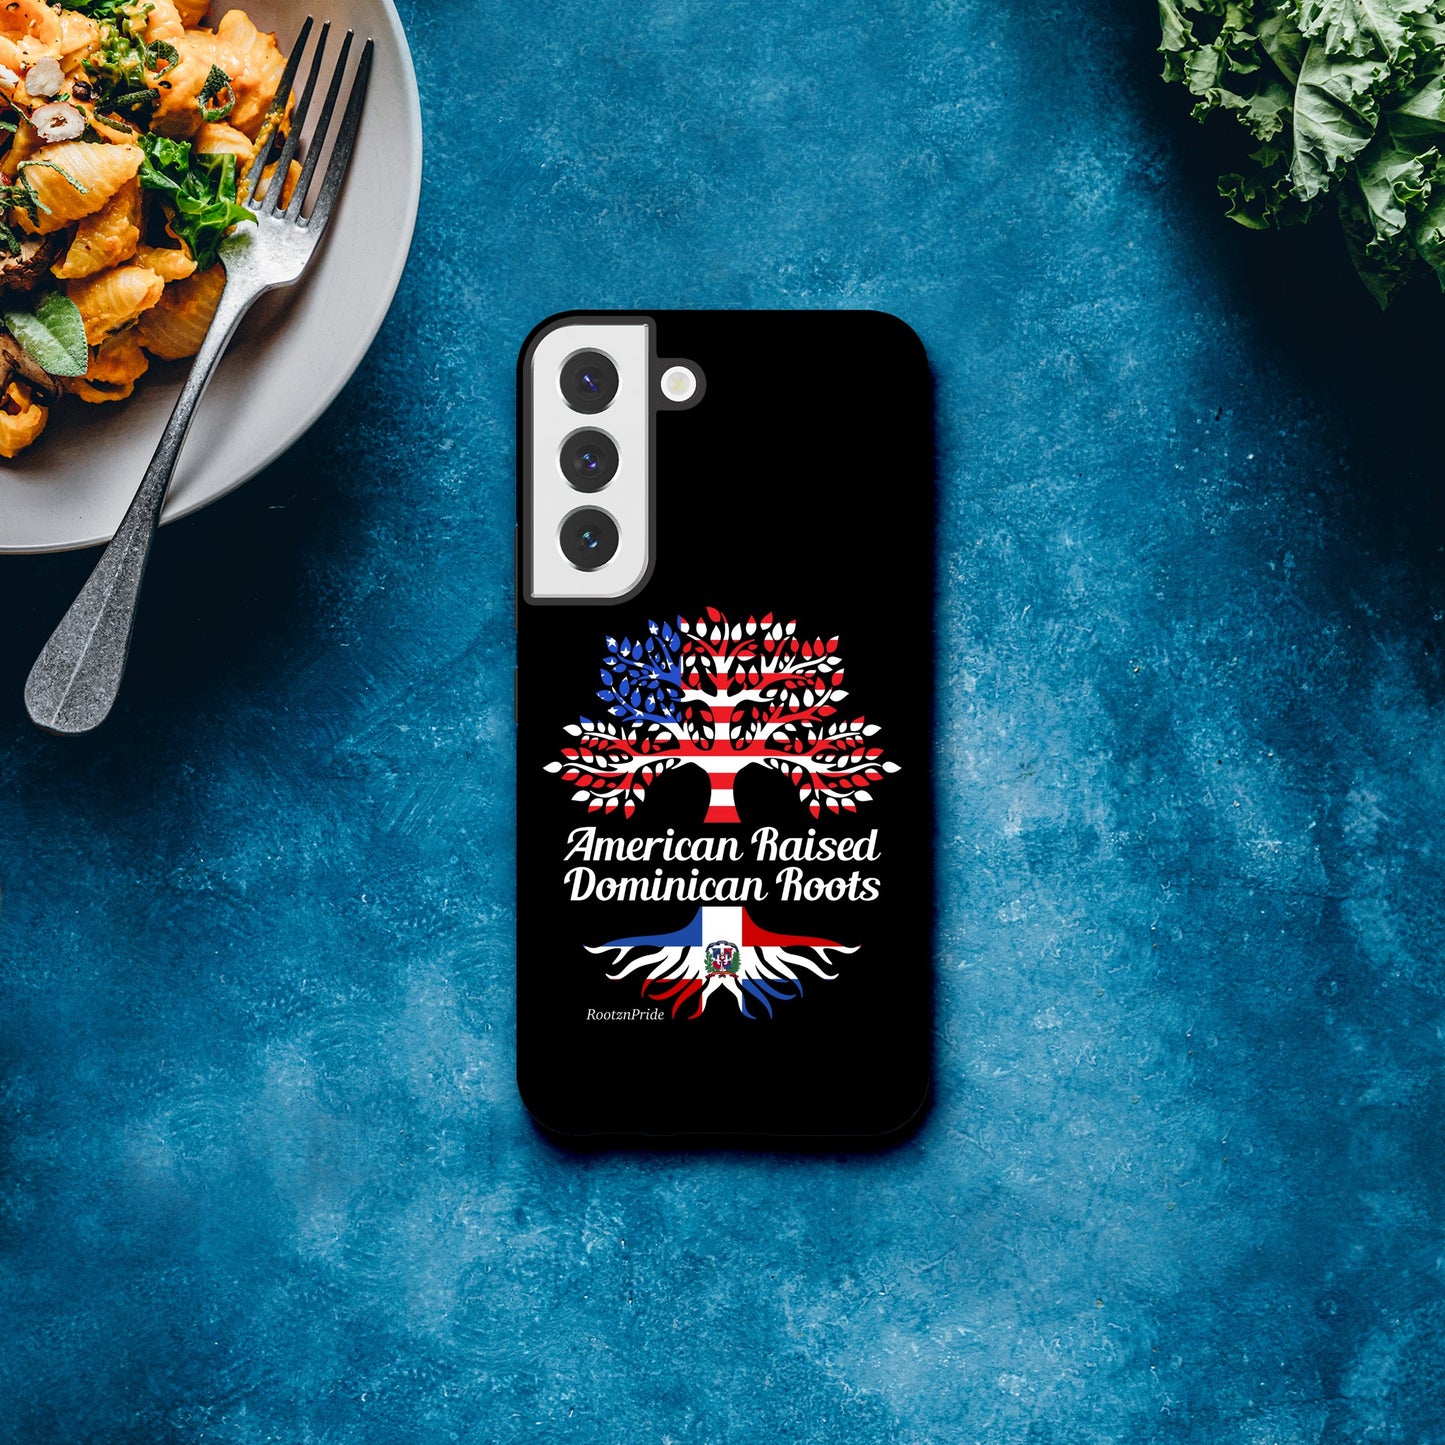 Dominican Roots Design 5: iPhone/Samsung - Tough Case